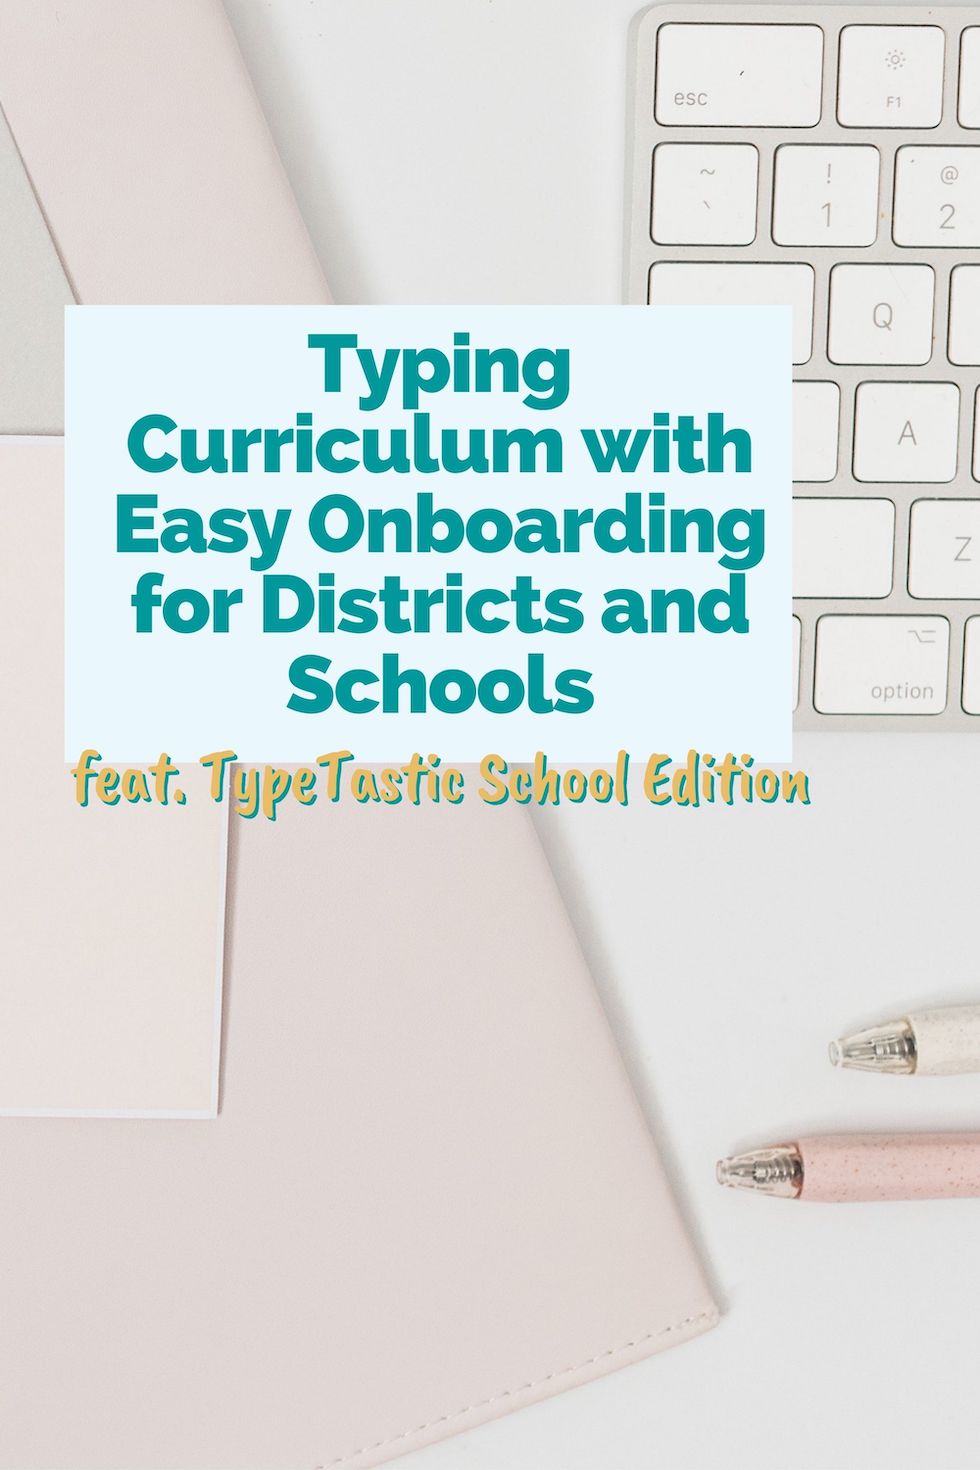 Do you use Clever Secure Sync, Classlink SSO, or Google Classroom? The typing curriculum TypeTastic School Edition offers easy onboarding.